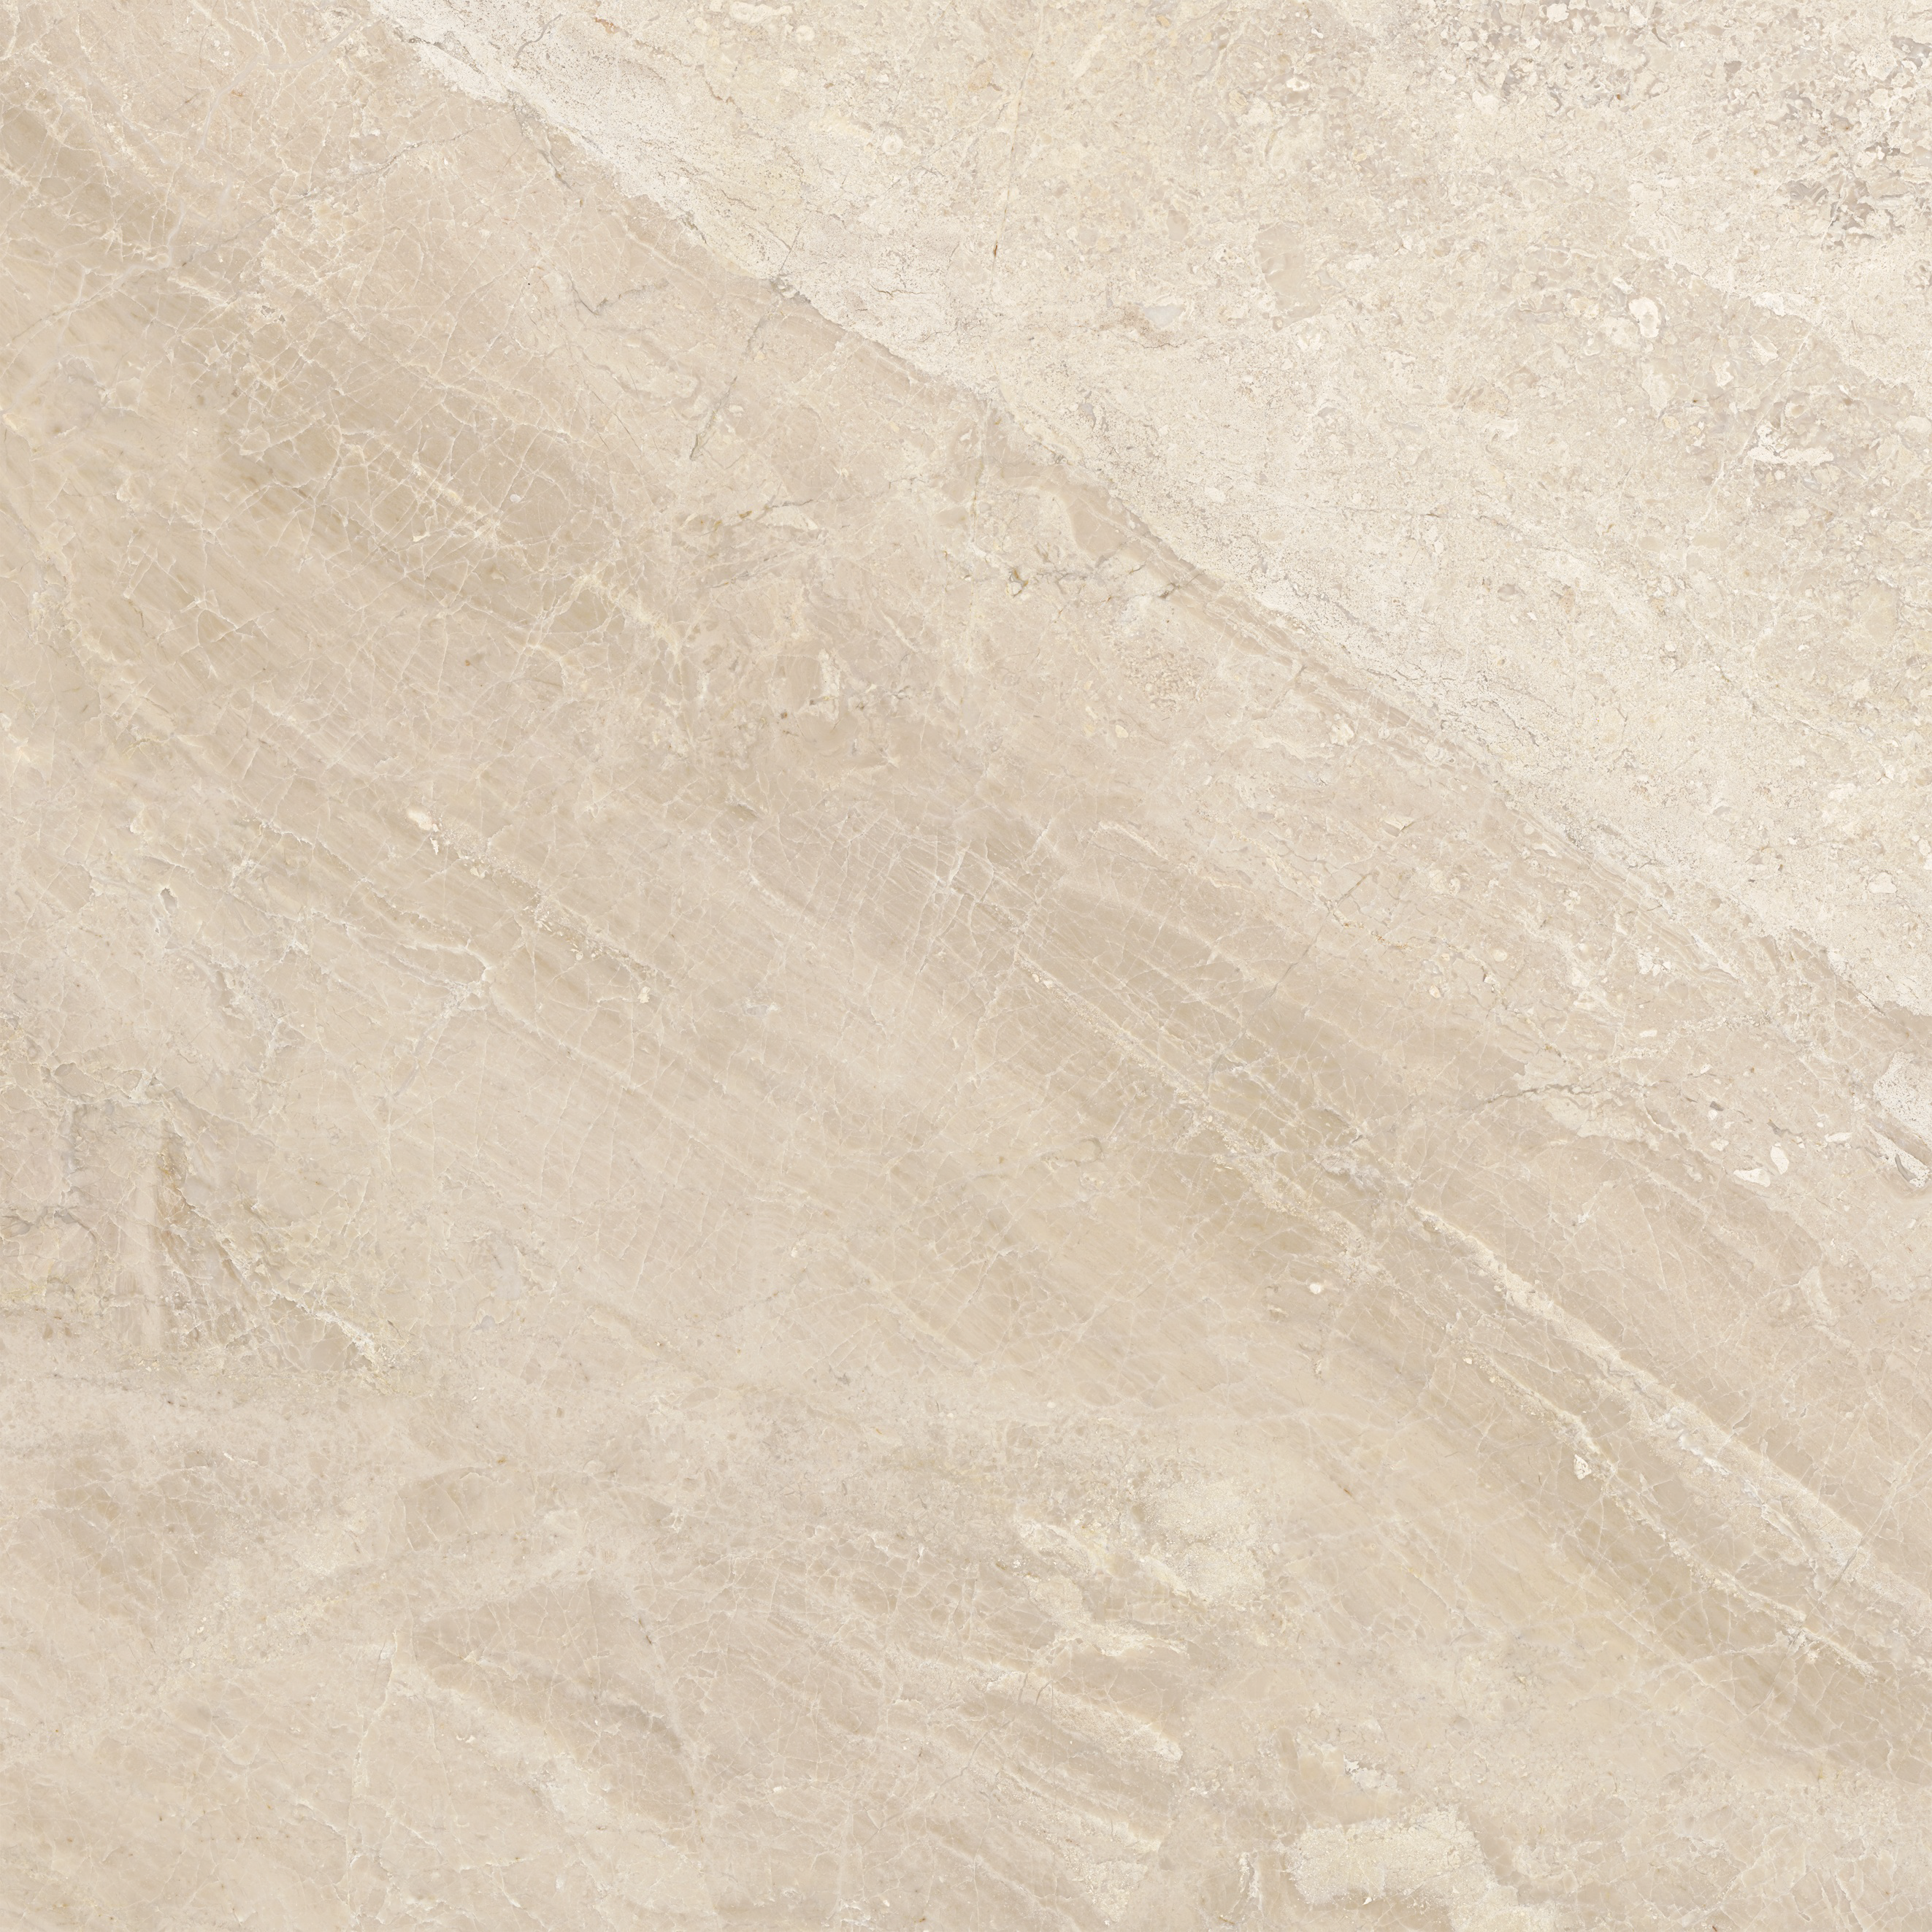 marble pattern natural stone field tile from impero reale anatolia collection distributed by surface group international polished finish straight edge edge 24x24 square shape